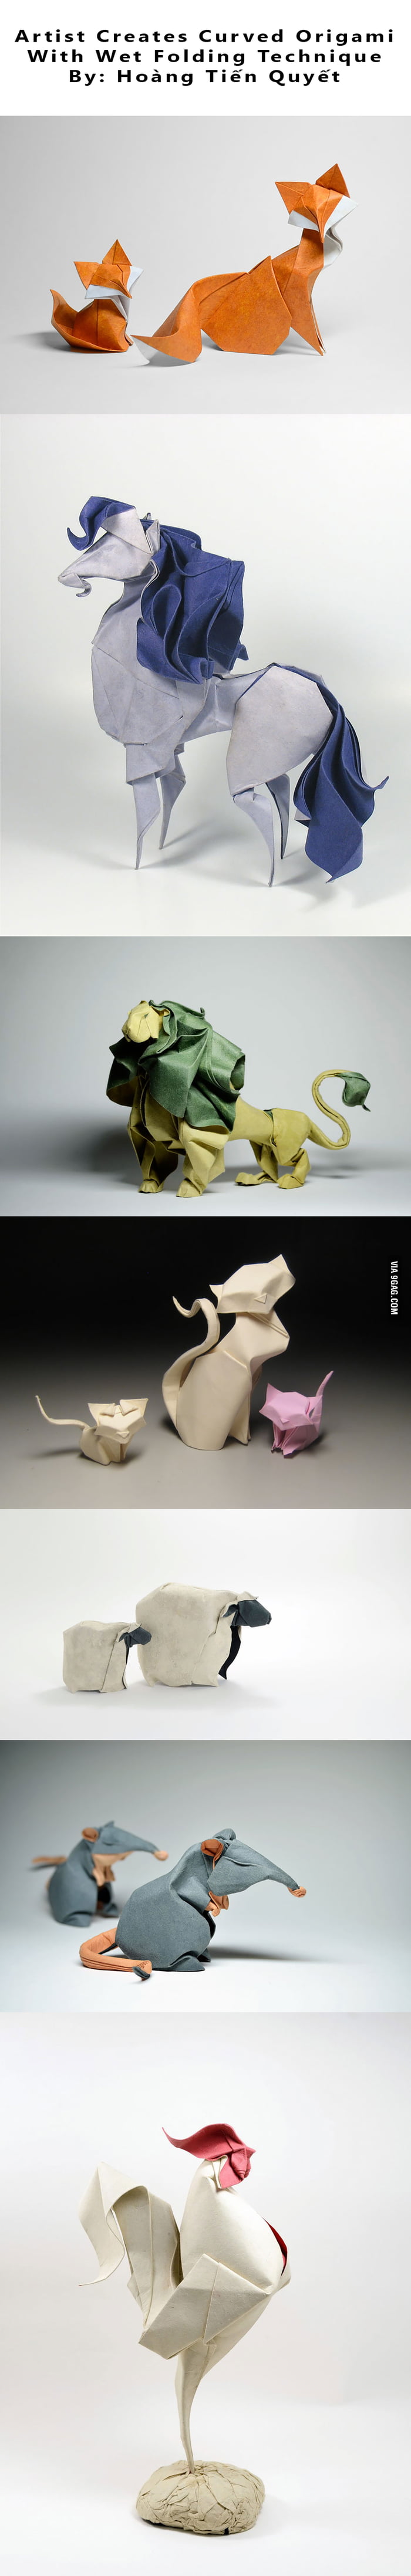 Artist Creates Curved Origami With Wet Folding TechniqueBy Vietnamese artist Hoàng Tiến Quyết